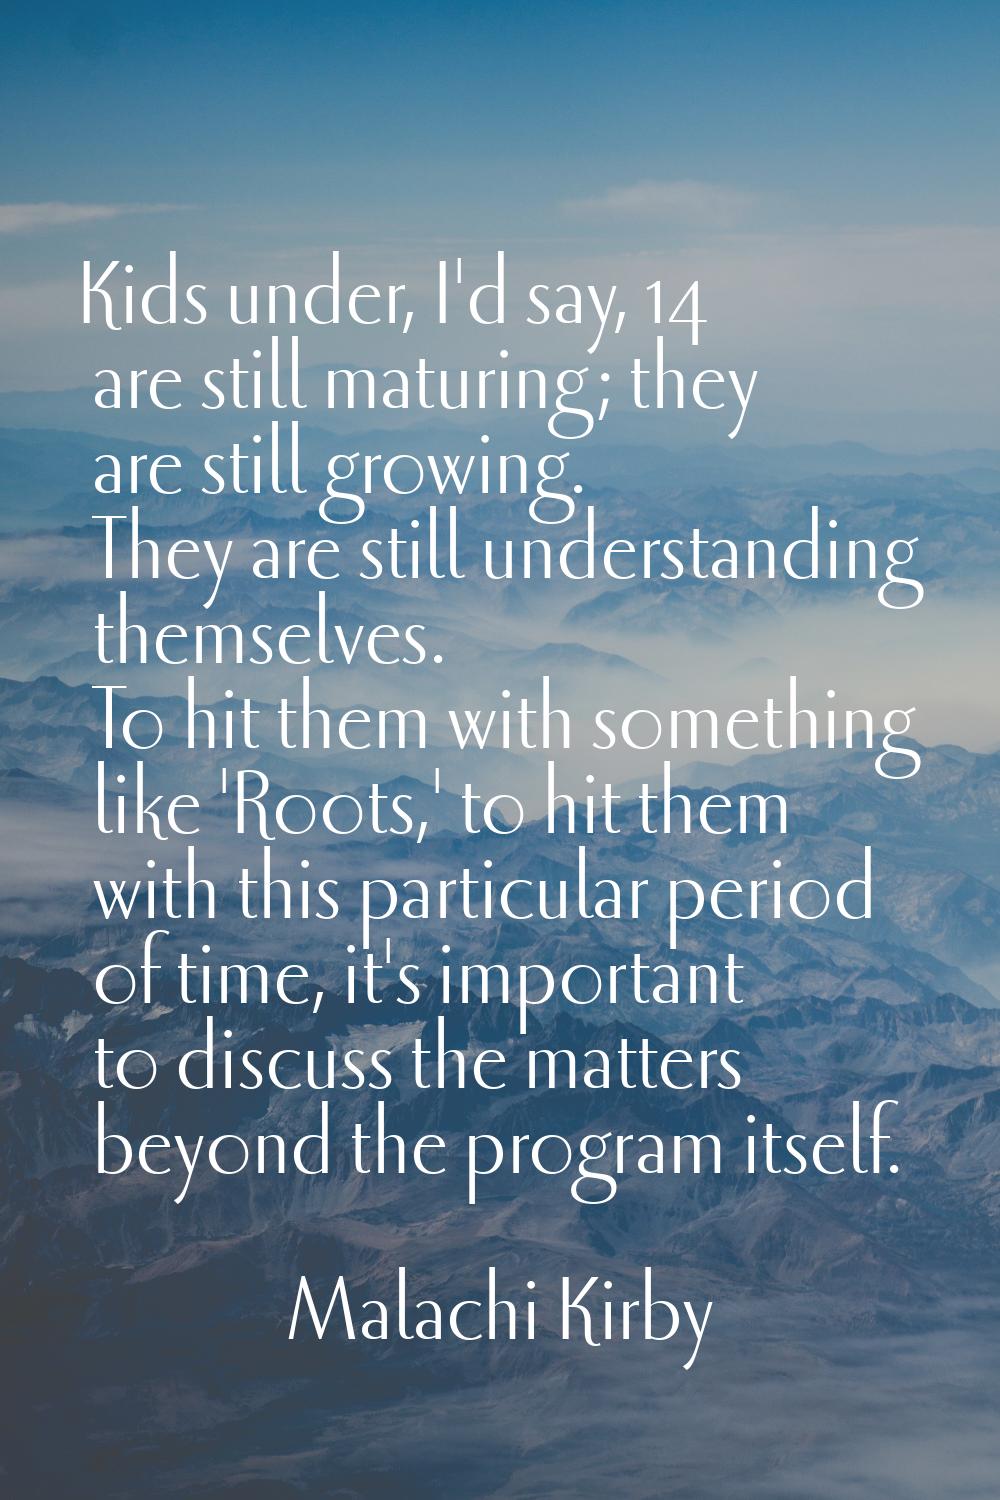 Kids under, I'd say, 14 are still maturing; they are still growing. They are still understanding th